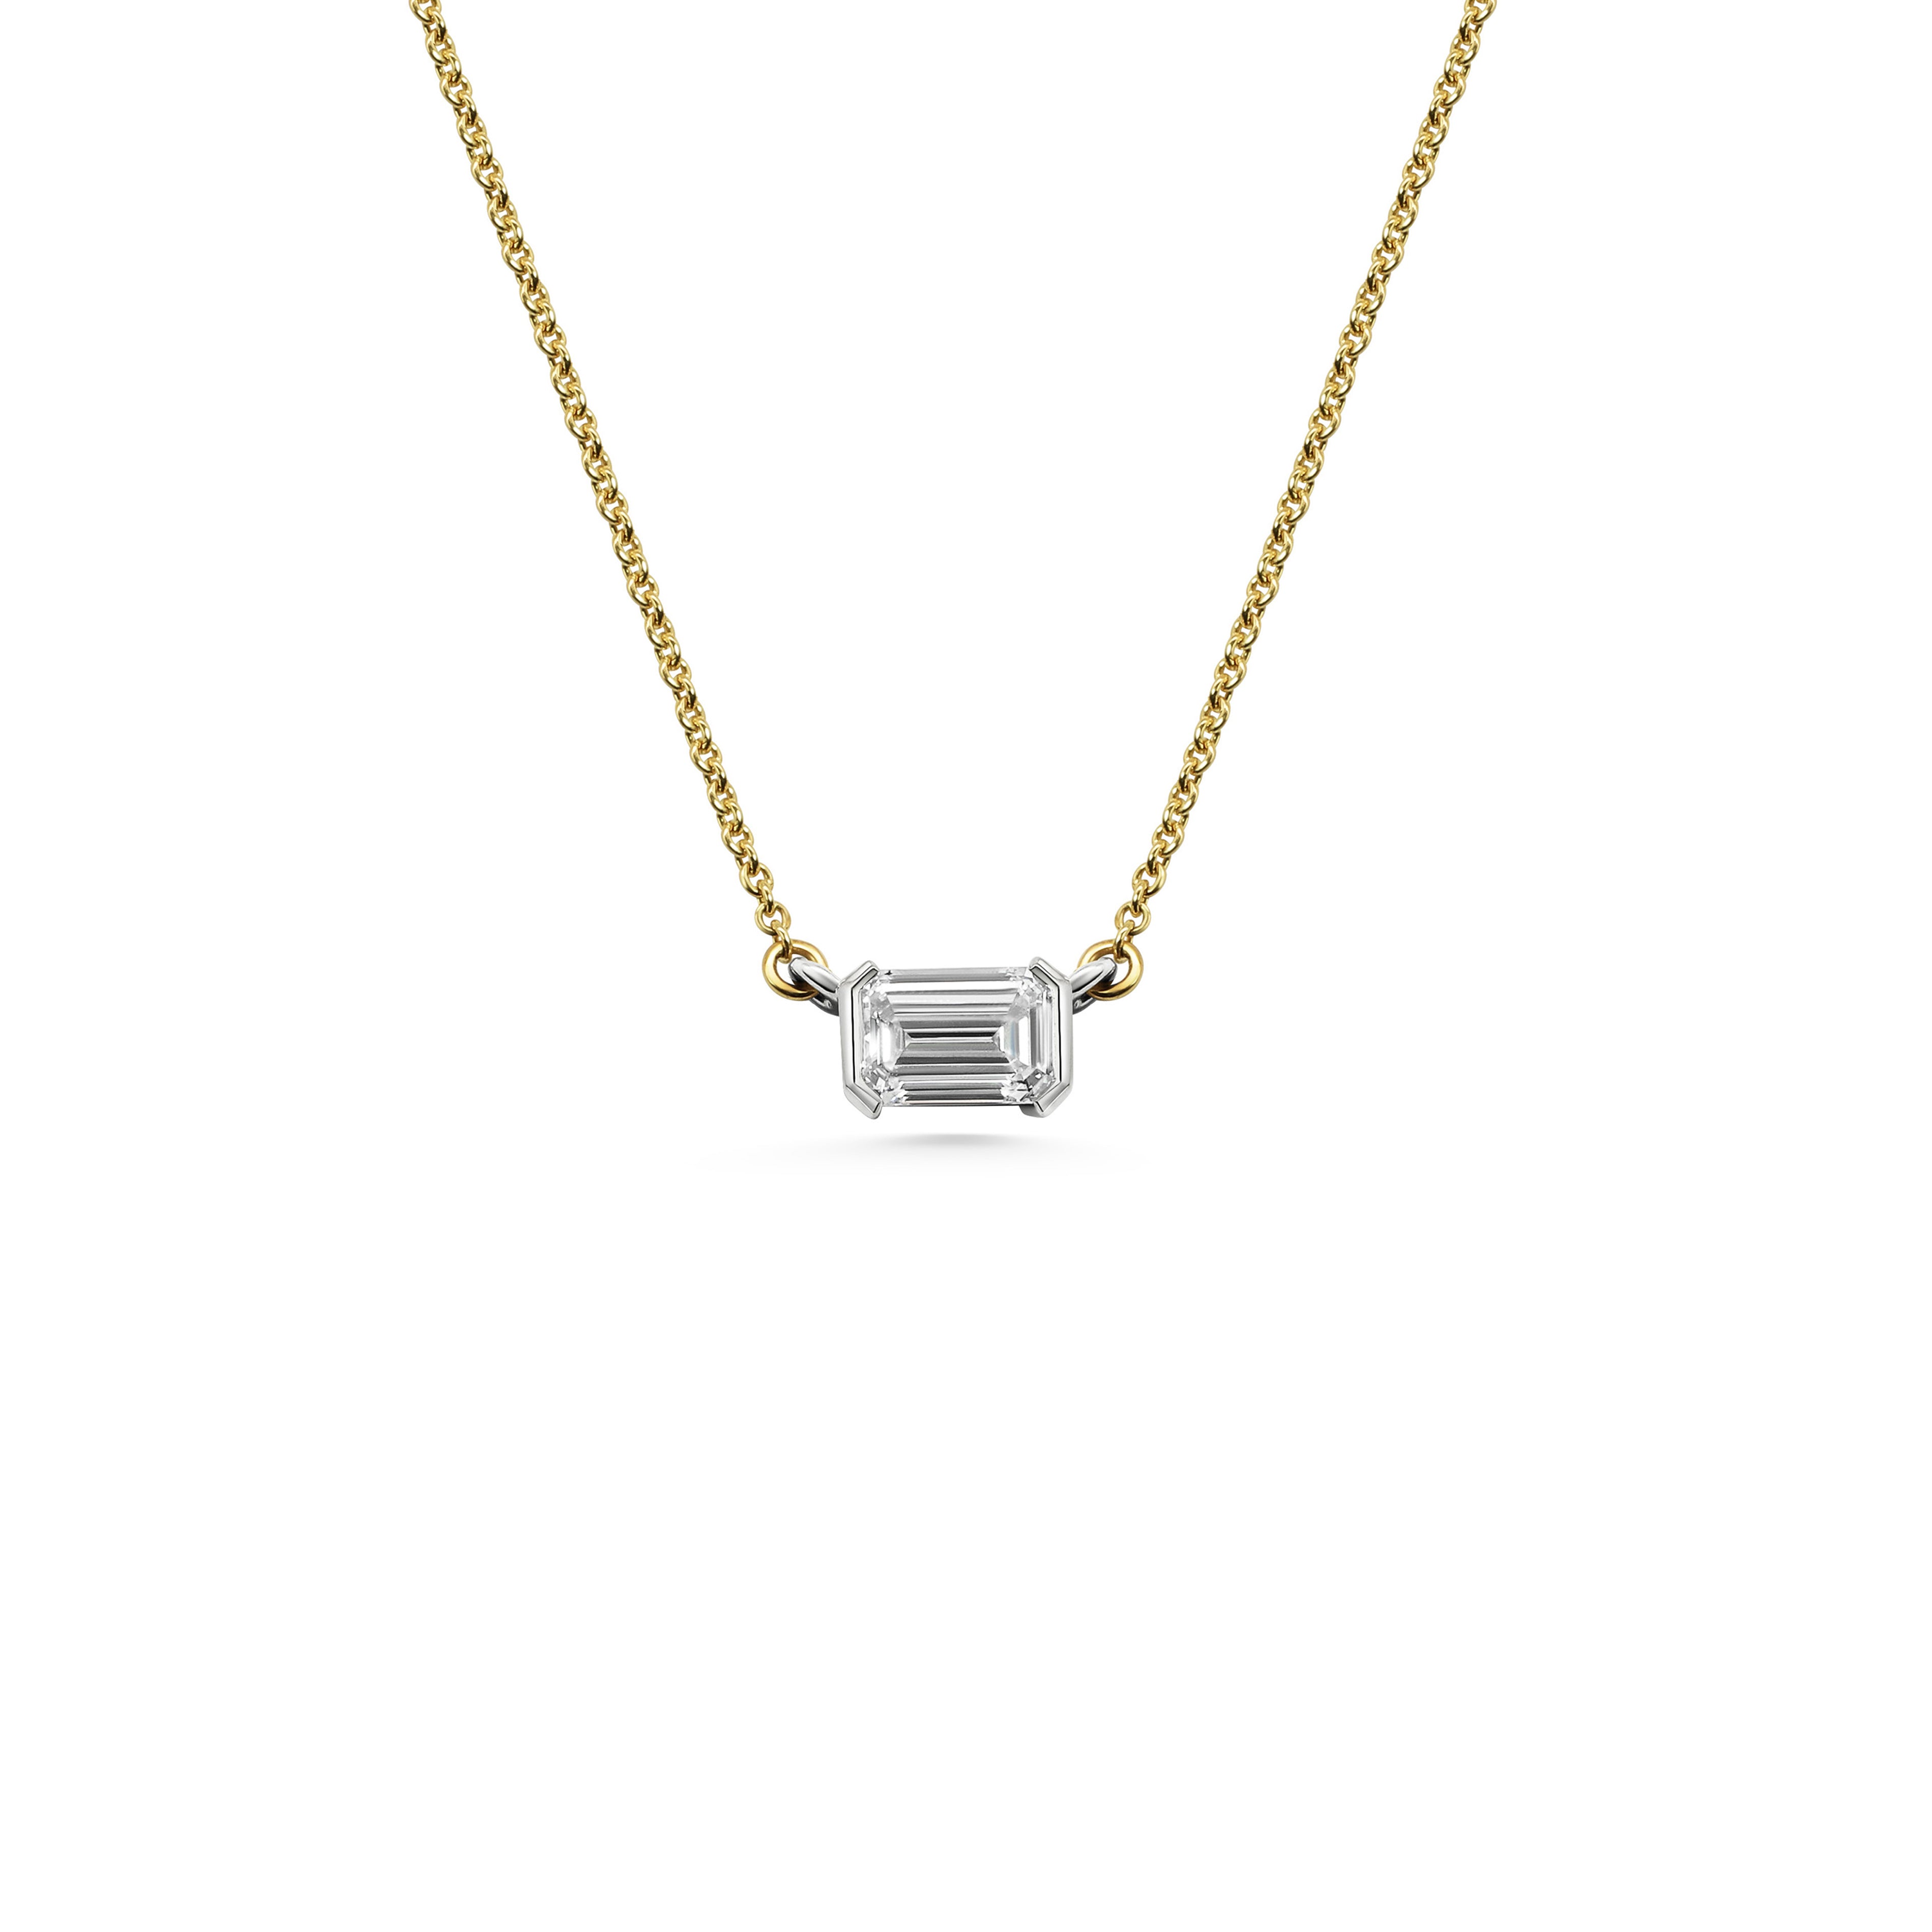 The Carrington Necklace - 0.40ct by East London jeweller Rachel Boston | Discover our collections of unique and timeless engagement rings, wedding rings, and modern fine jewellery.